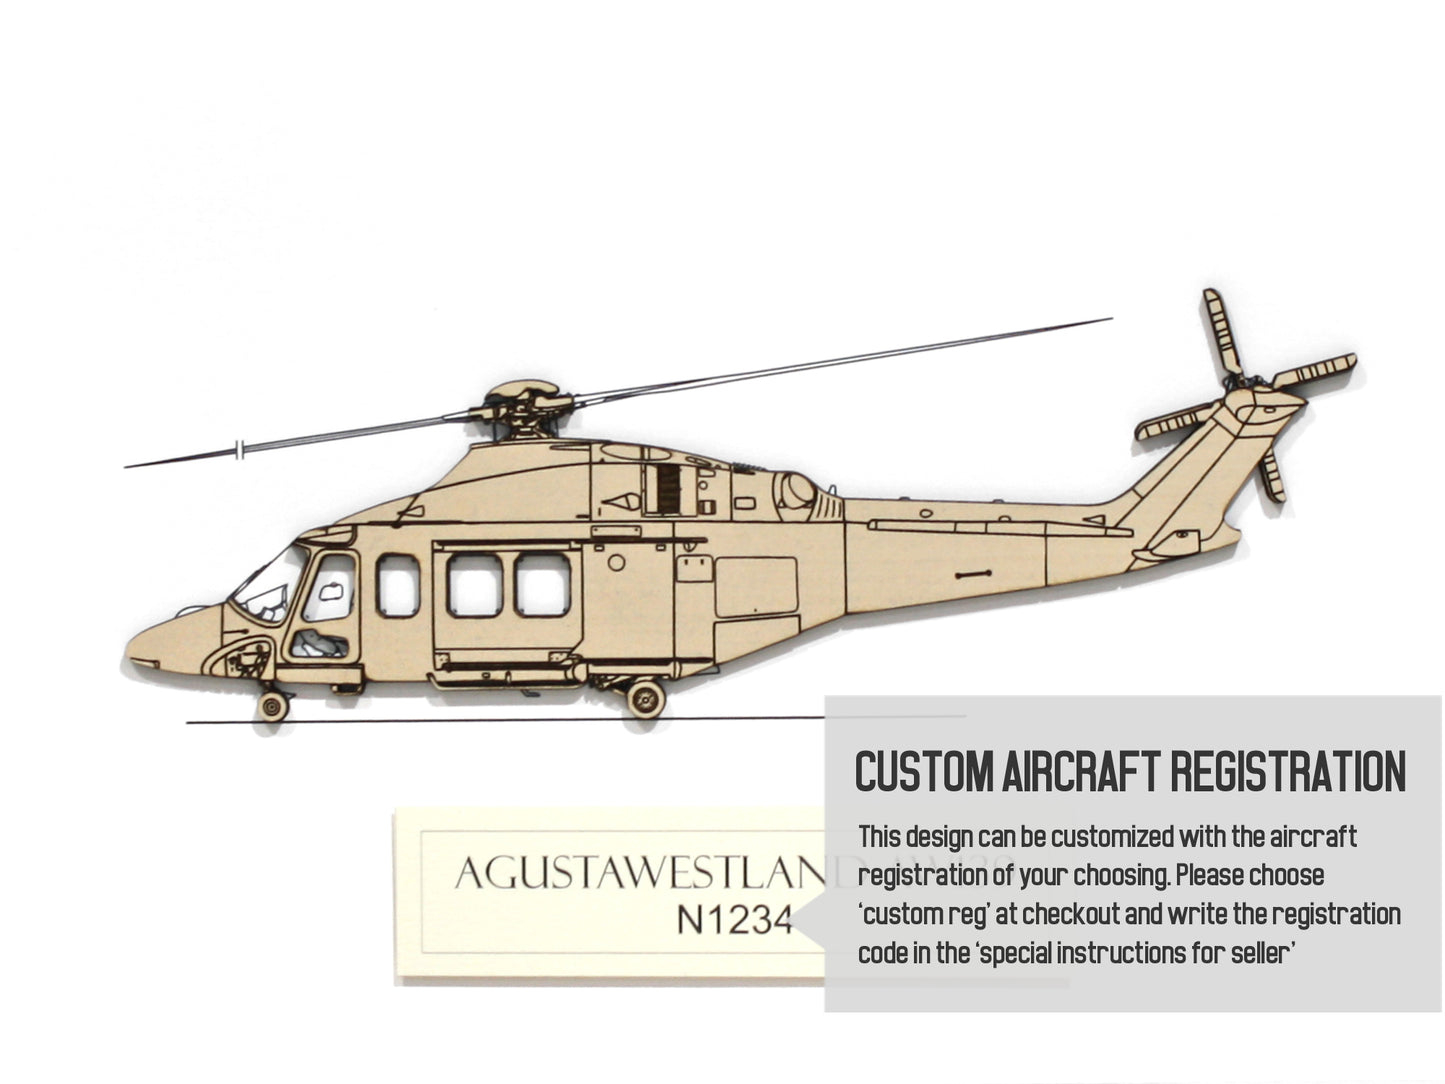 AW139 helicopter art